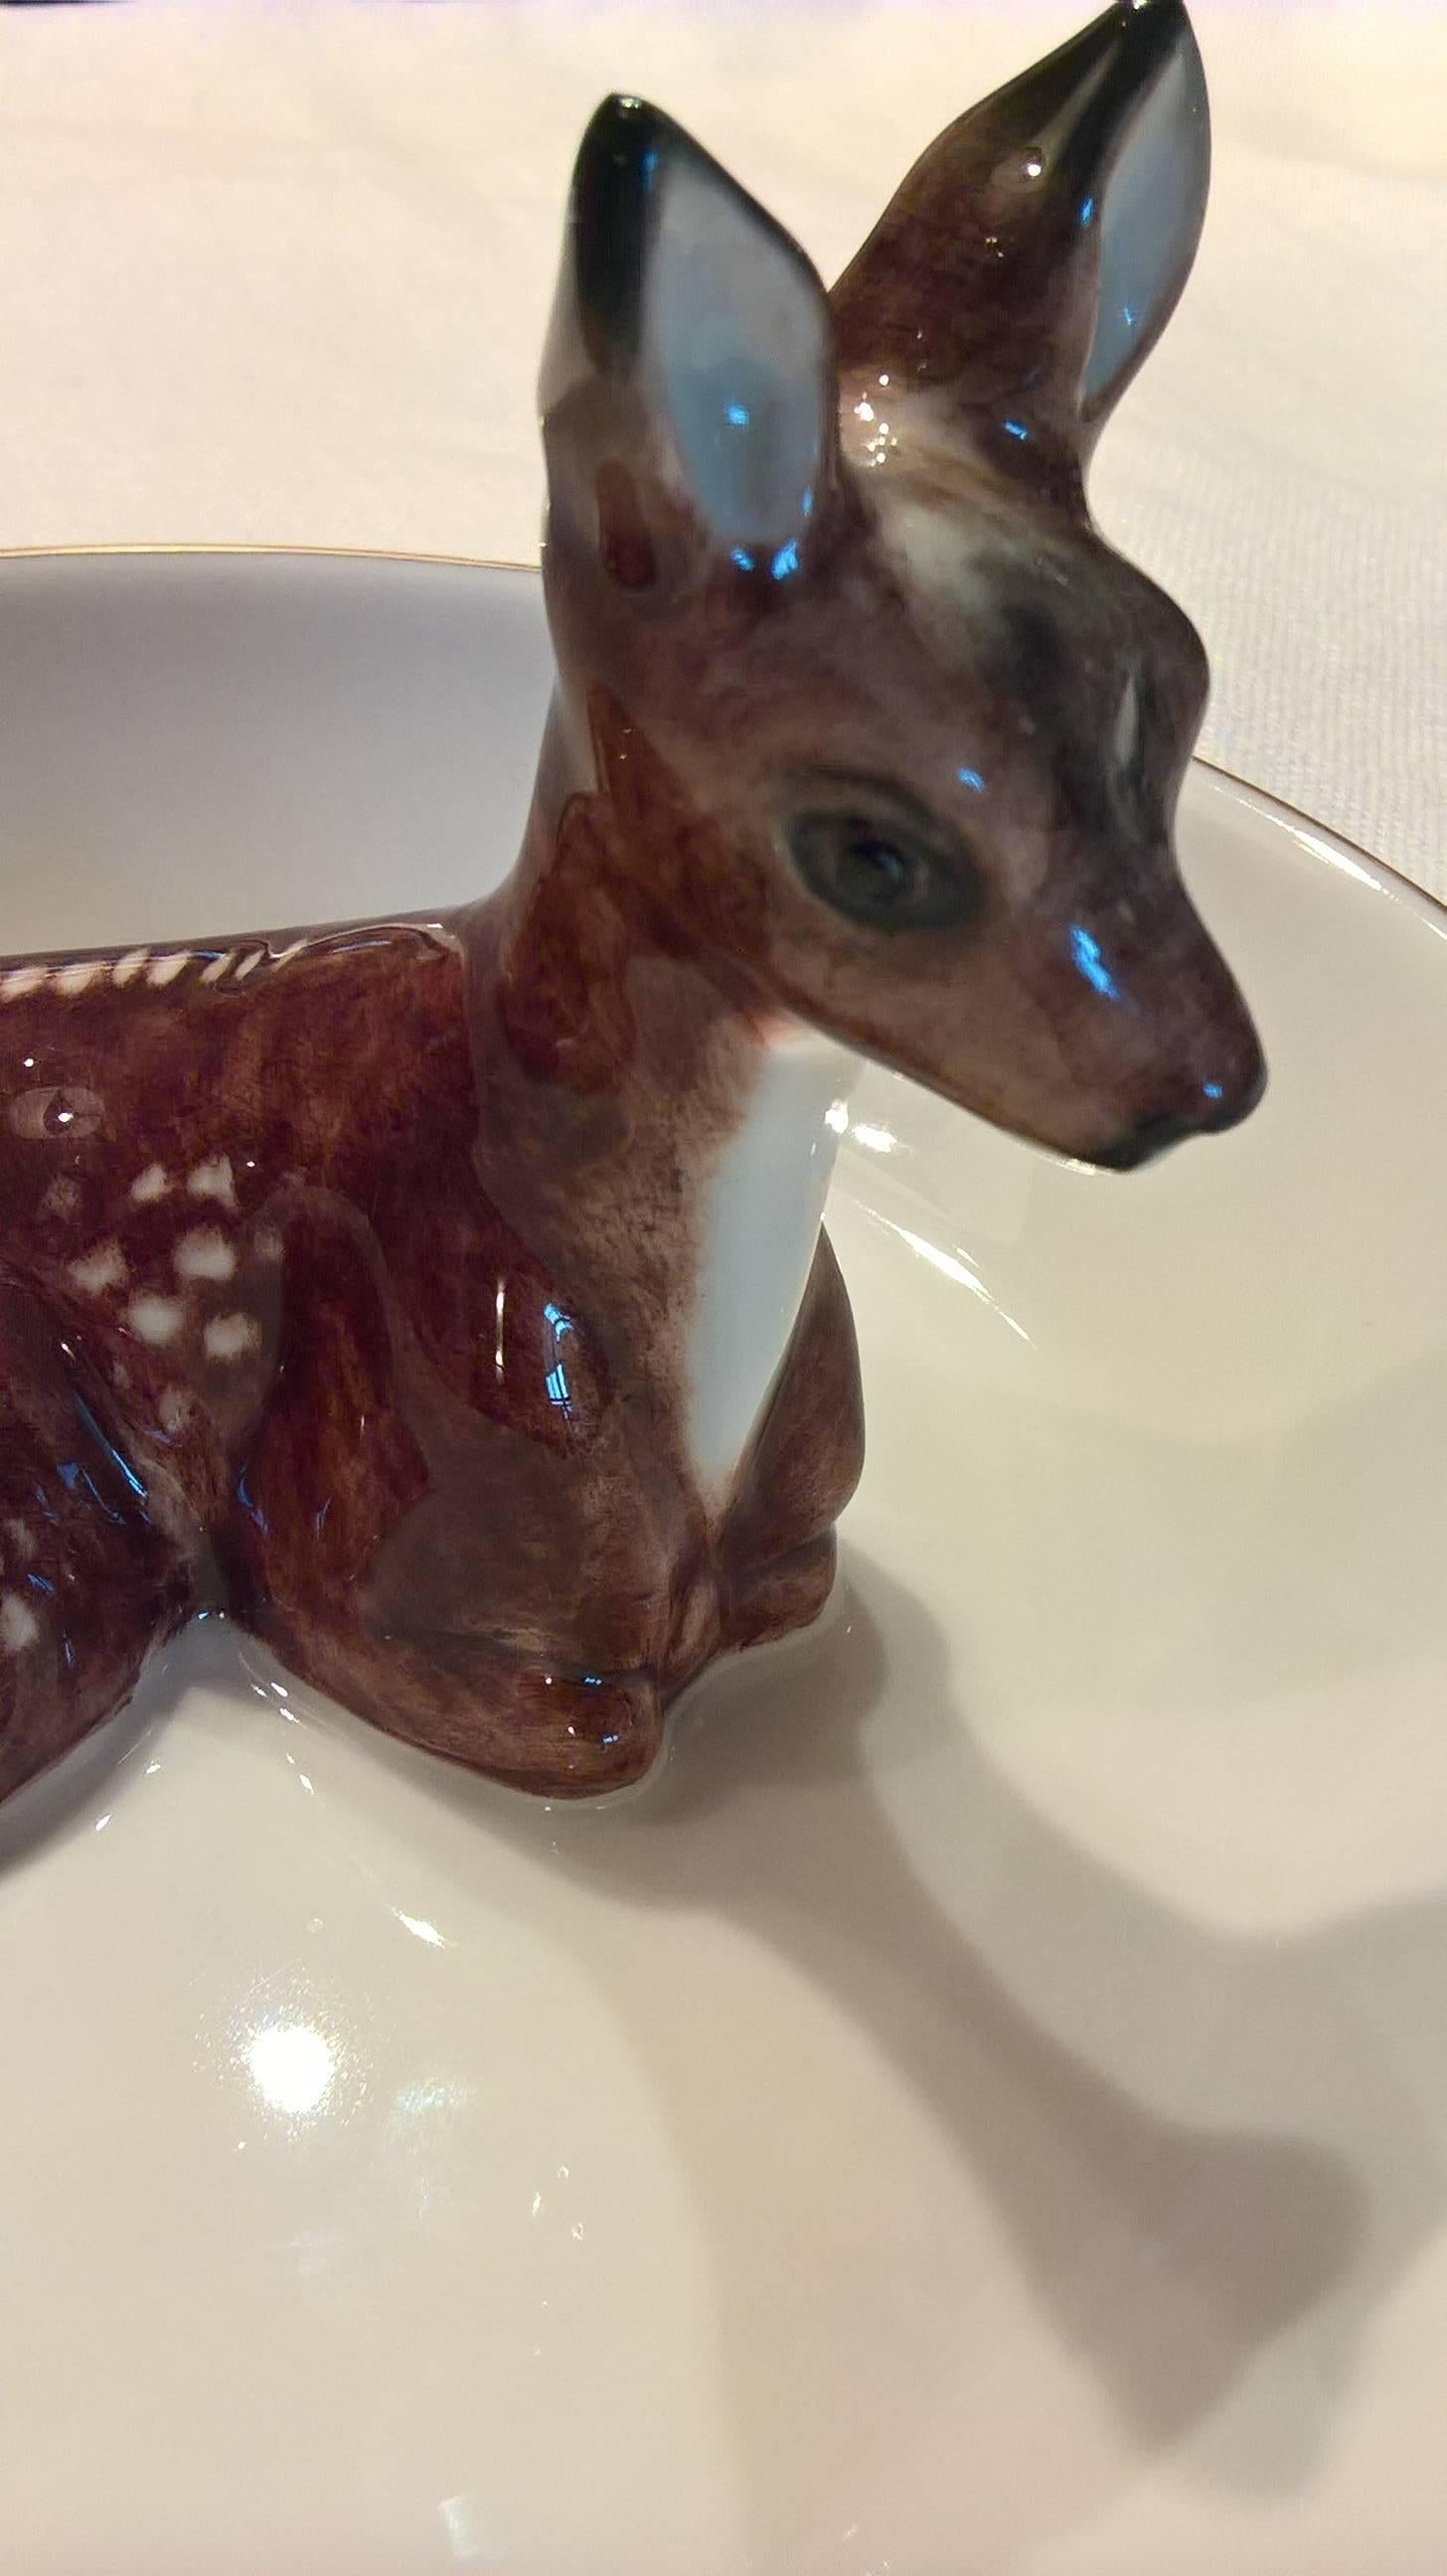 Hand-painted porcelain dish for serving sweets or nuts with a naturalistic bambi figure in the center of the dish. The bambi figure and the bowl are completely handmade in Bavaria. Hand-painted bambi figure with a green line and platinum